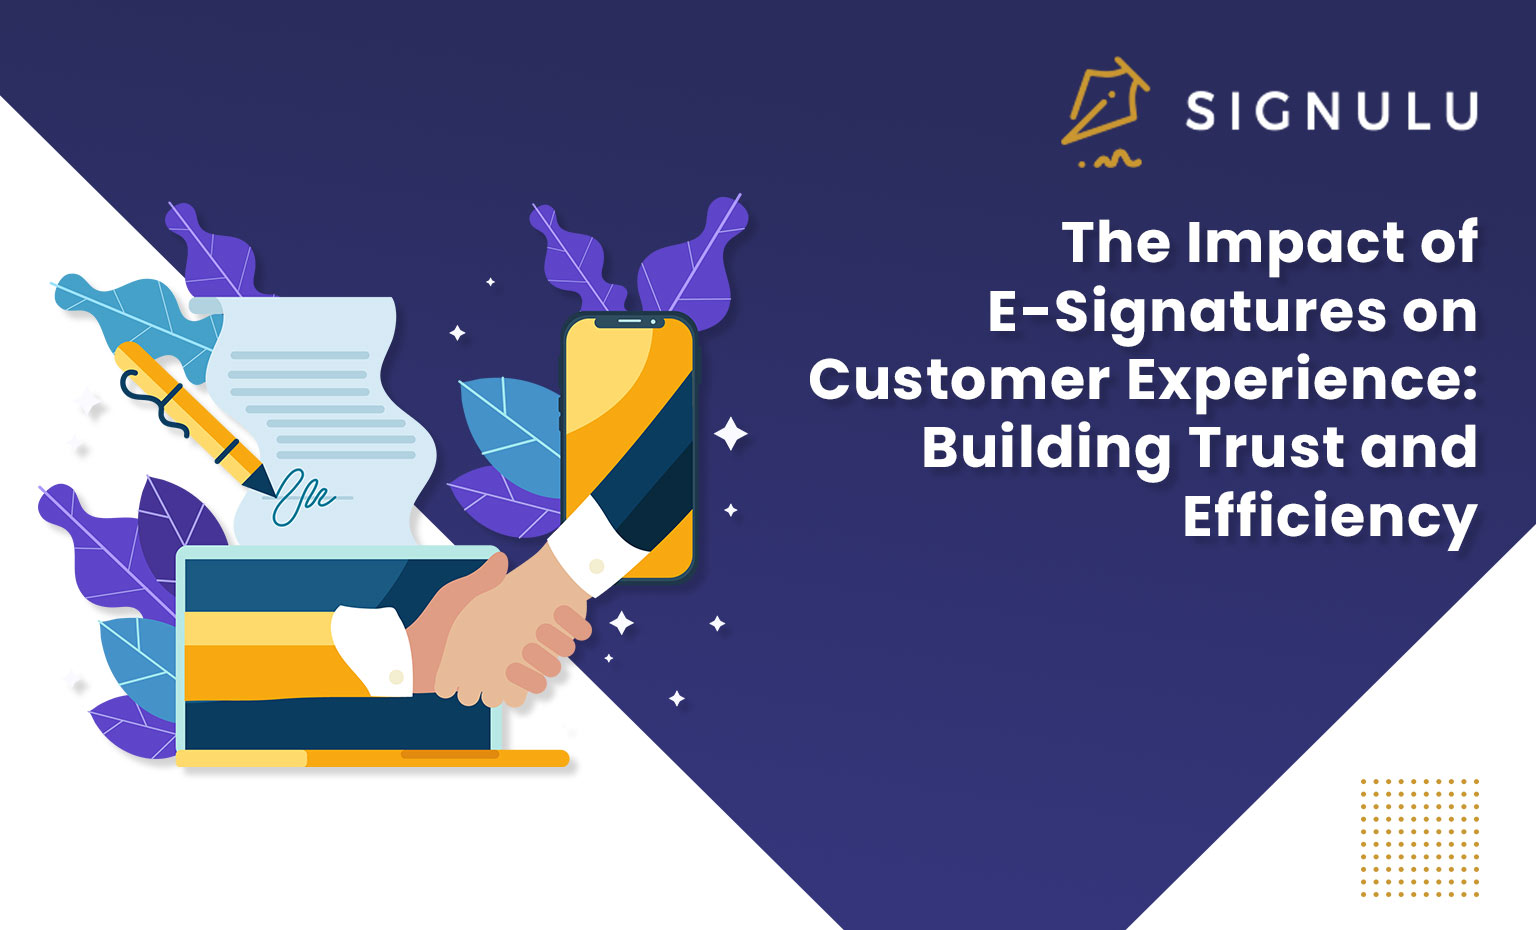 The Impact of E-Signatures on Customer Experience: Building Trust and Efficiency